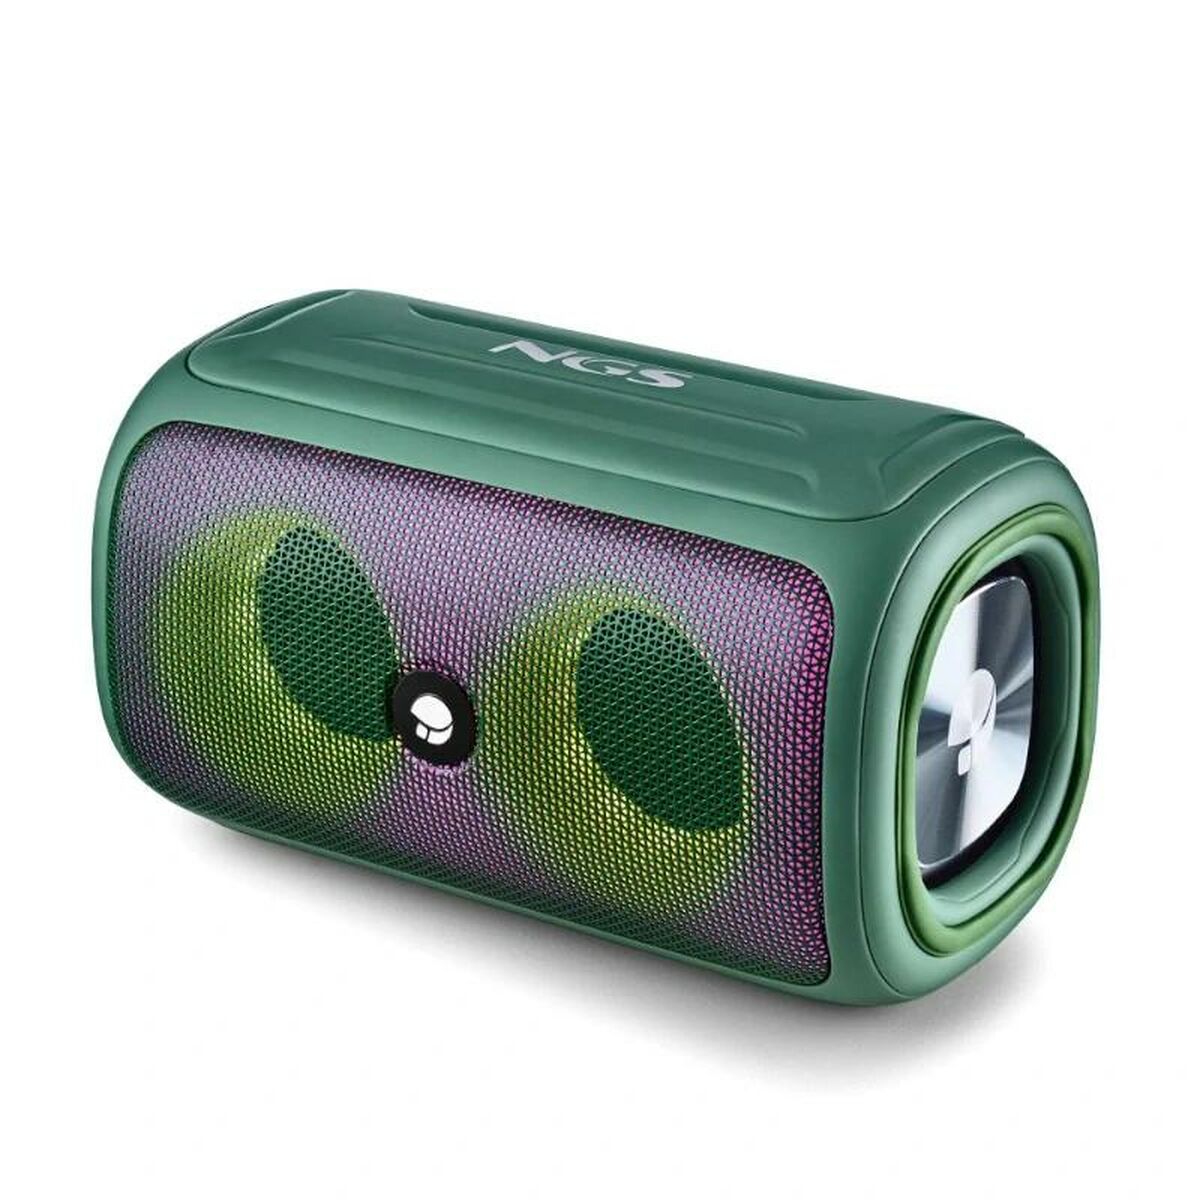 Portable Bluetooth Speakers NGS ELEC-SPK-0810, NGS, Electronics, Radio communication, portable-bluetooth-speakers-ngs-elec-spk-0810, Brand_NGS, category-reference-2609, category-reference-2637, category-reference-2882, category-reference-t-16442, category-reference-t-16443, category-reference-t-16444, category-reference-t-19653, cinema and television, Condition_NEW, entertainment, music, Price_50 - 100, RiotNook